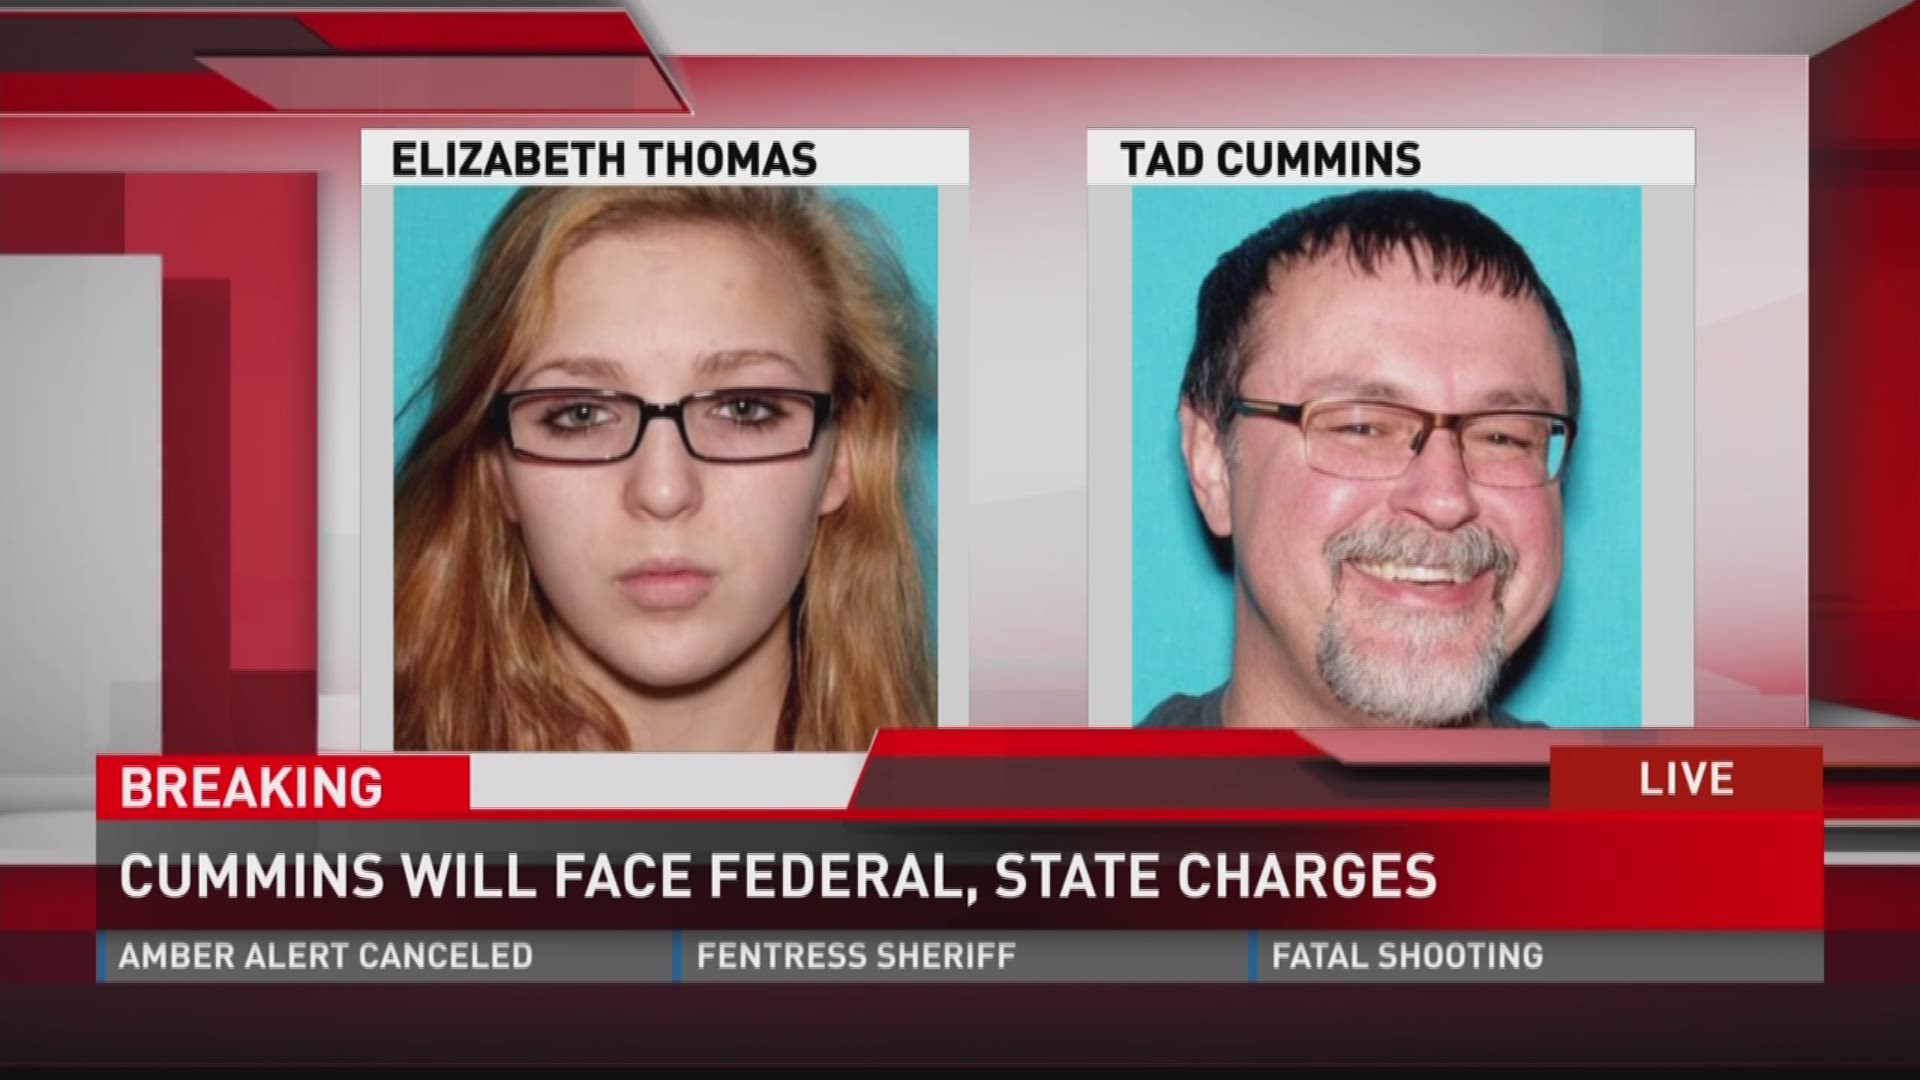 Local, state, and federal officials give an update on the Tad Cummins and Elizabeth Thomas case. (4/20/17 NBC)